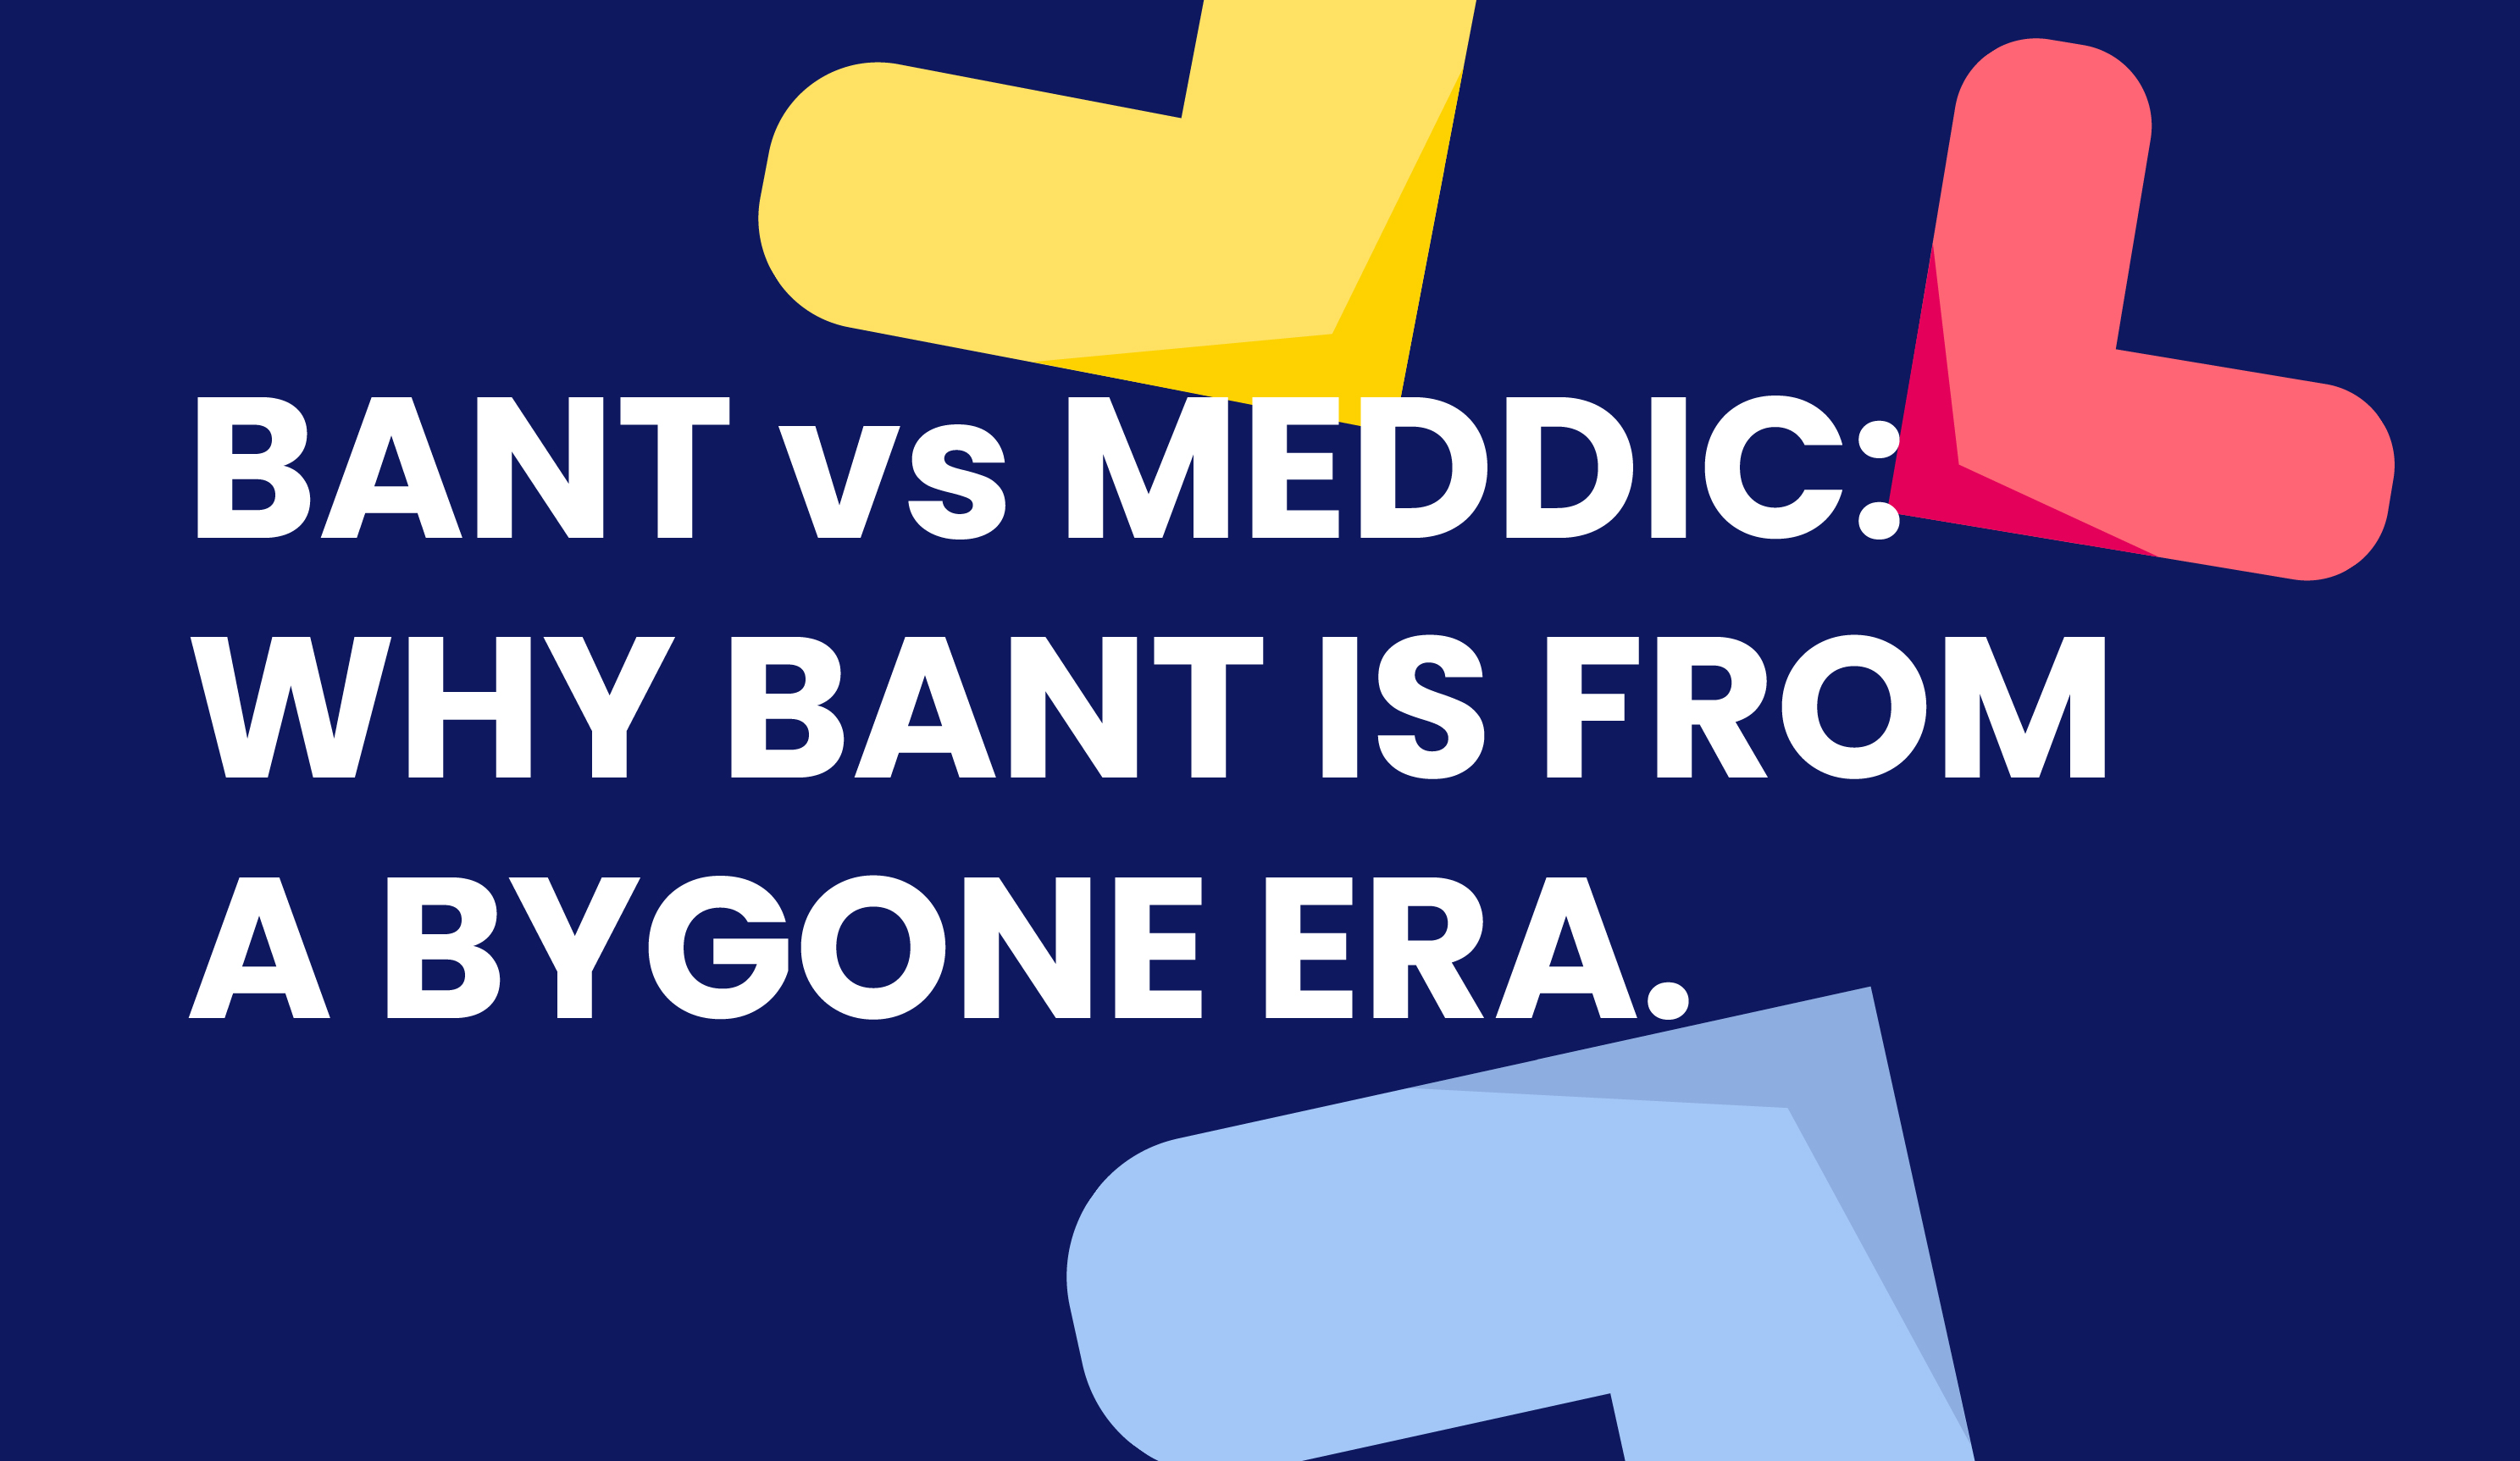 BANT vs MEDDIC: Why BANT is From a Bygone Era